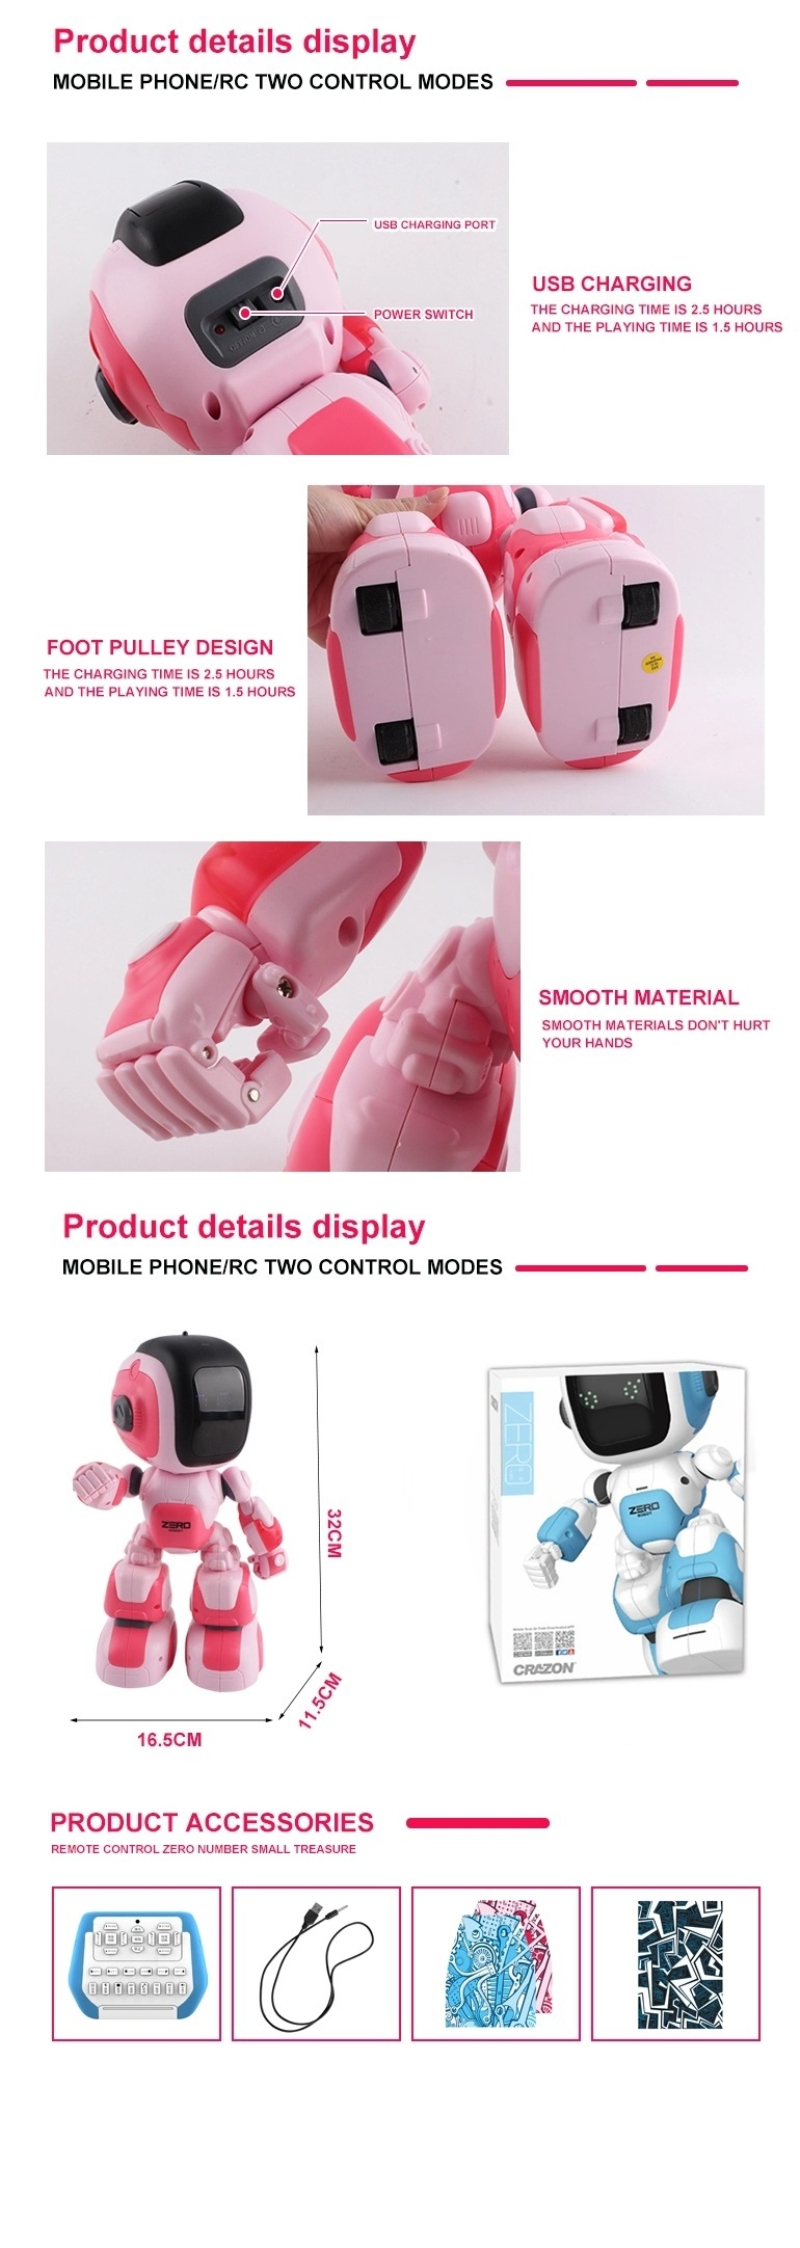 Multifunction Smart Robot Voice Control Singing Dancing Robot Children's Educational Toys Early Education Robot RC Robot Gifts